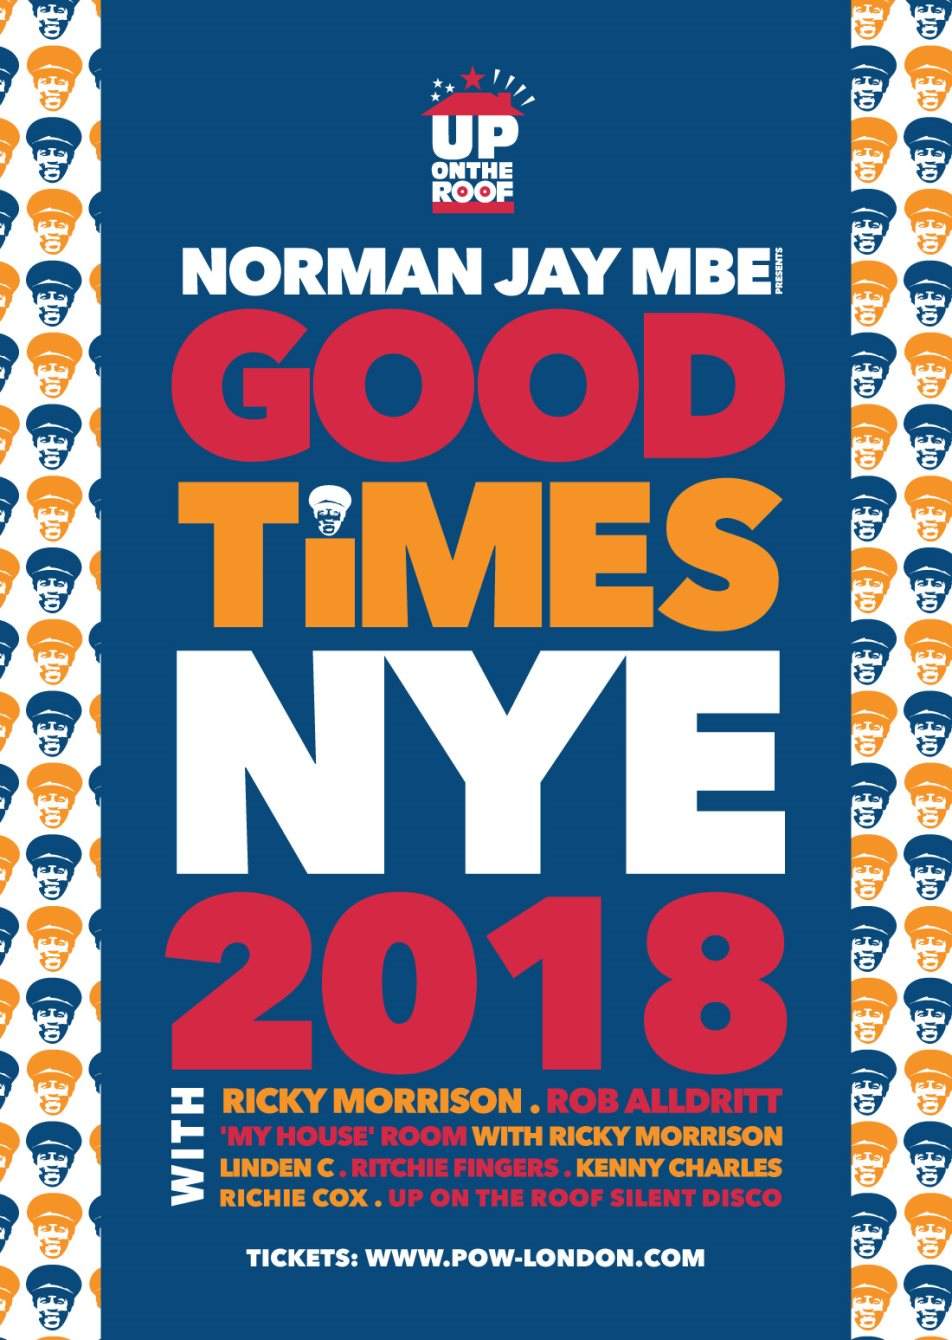 Good Times x Up On The Roof NYE 2018 with Norman Jay MBE - フライヤー表